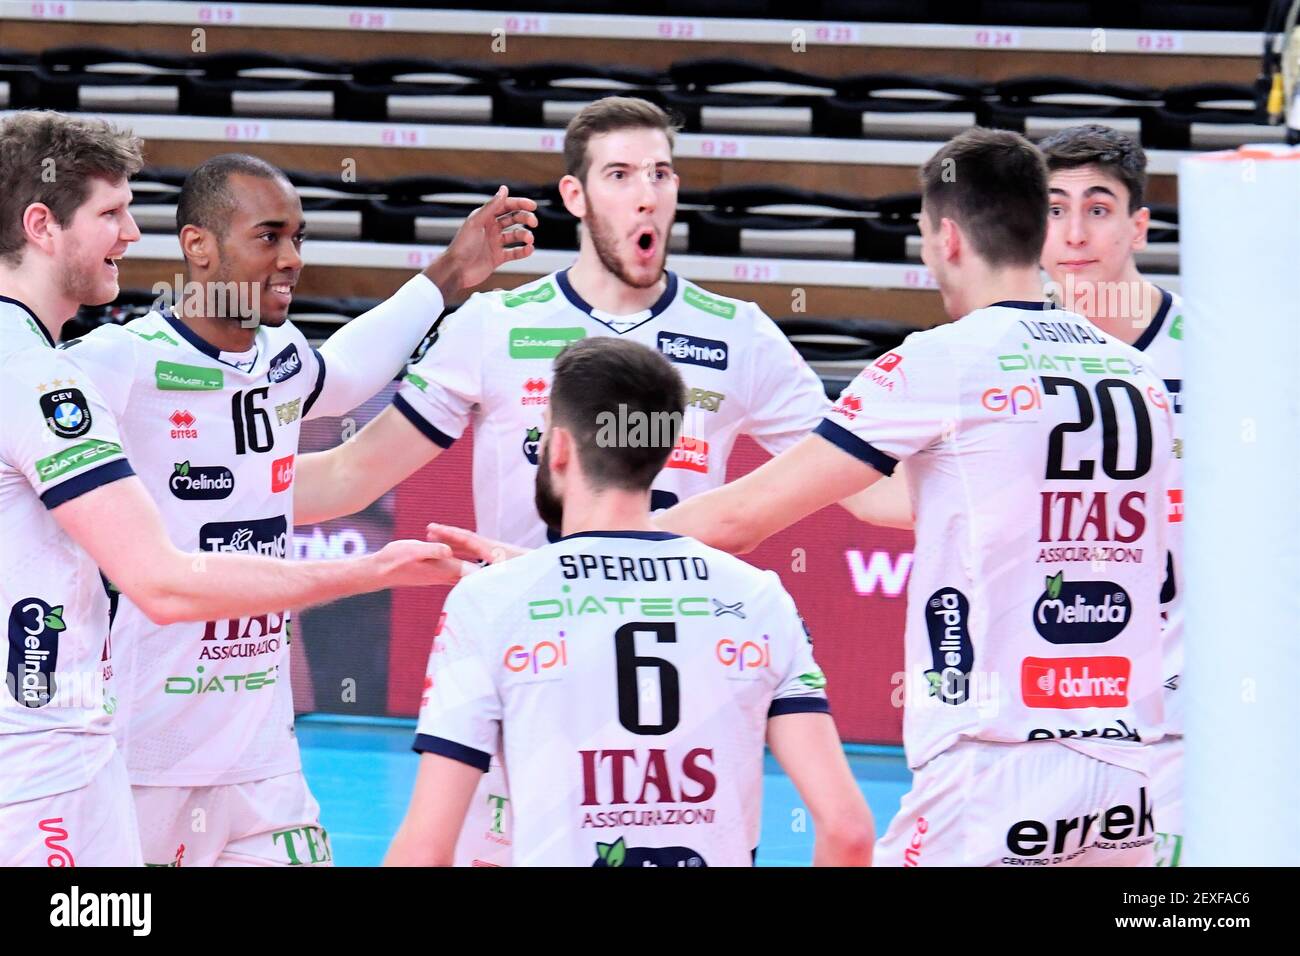 Trento, Italy. 04th Mar, 2021. Andrea Argenta Lorenzo Cortesia Luis Sosa Sierra (Trentino Itas) during Itas Trentino vs Berlin Recycling Volleys, CEV Champions League volleyball match in Trento, Italy, March 04 2021 Credit: Independent Photo Agency/Alamy Live News Stock Photo